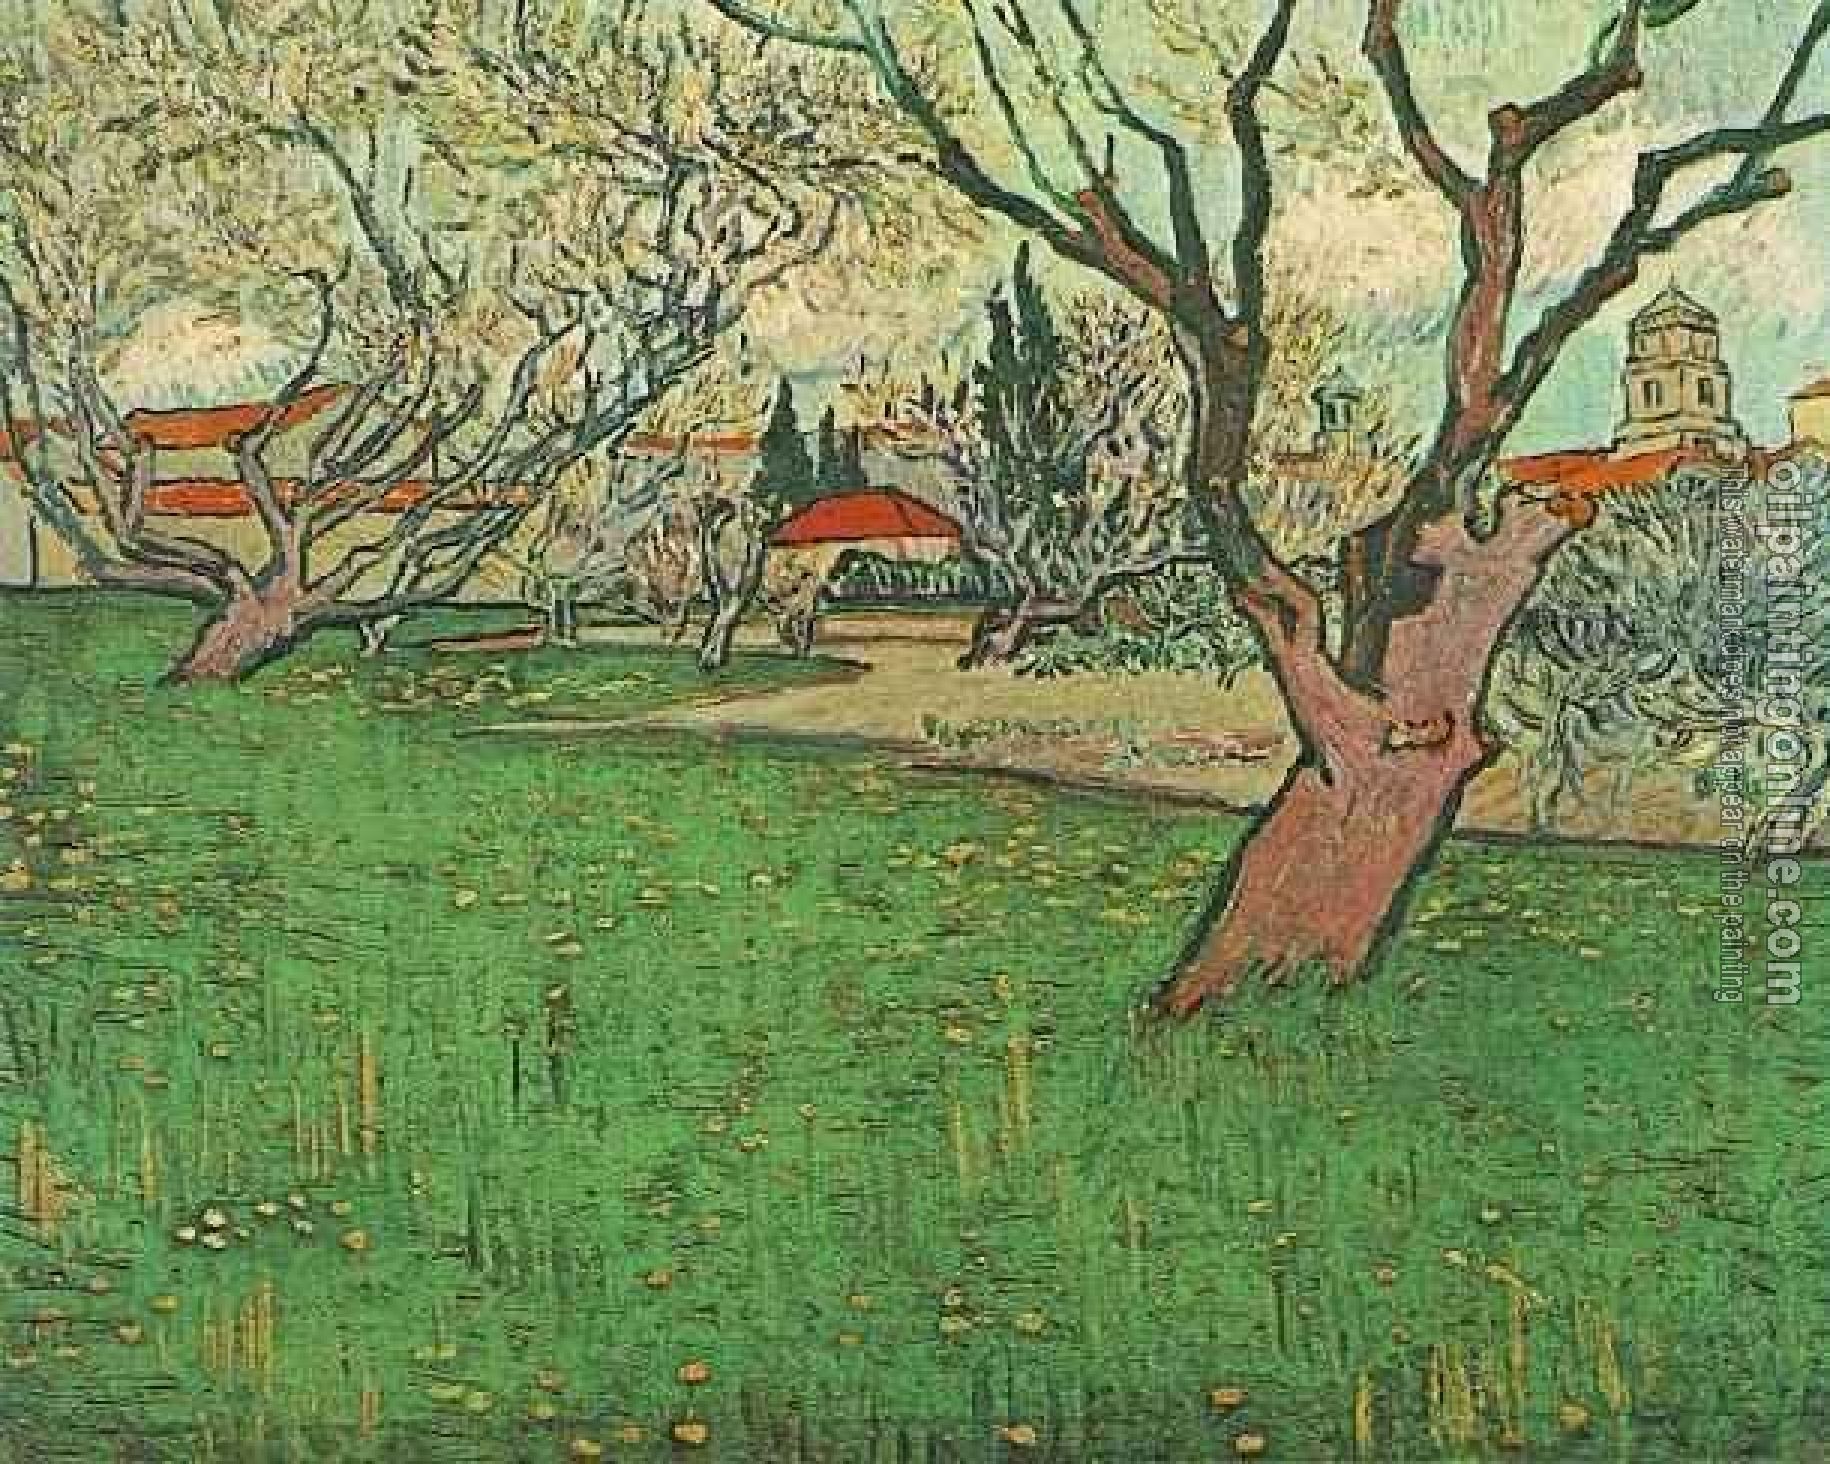 Gogh, Vincent van - View of Arles with Tress in Blossom